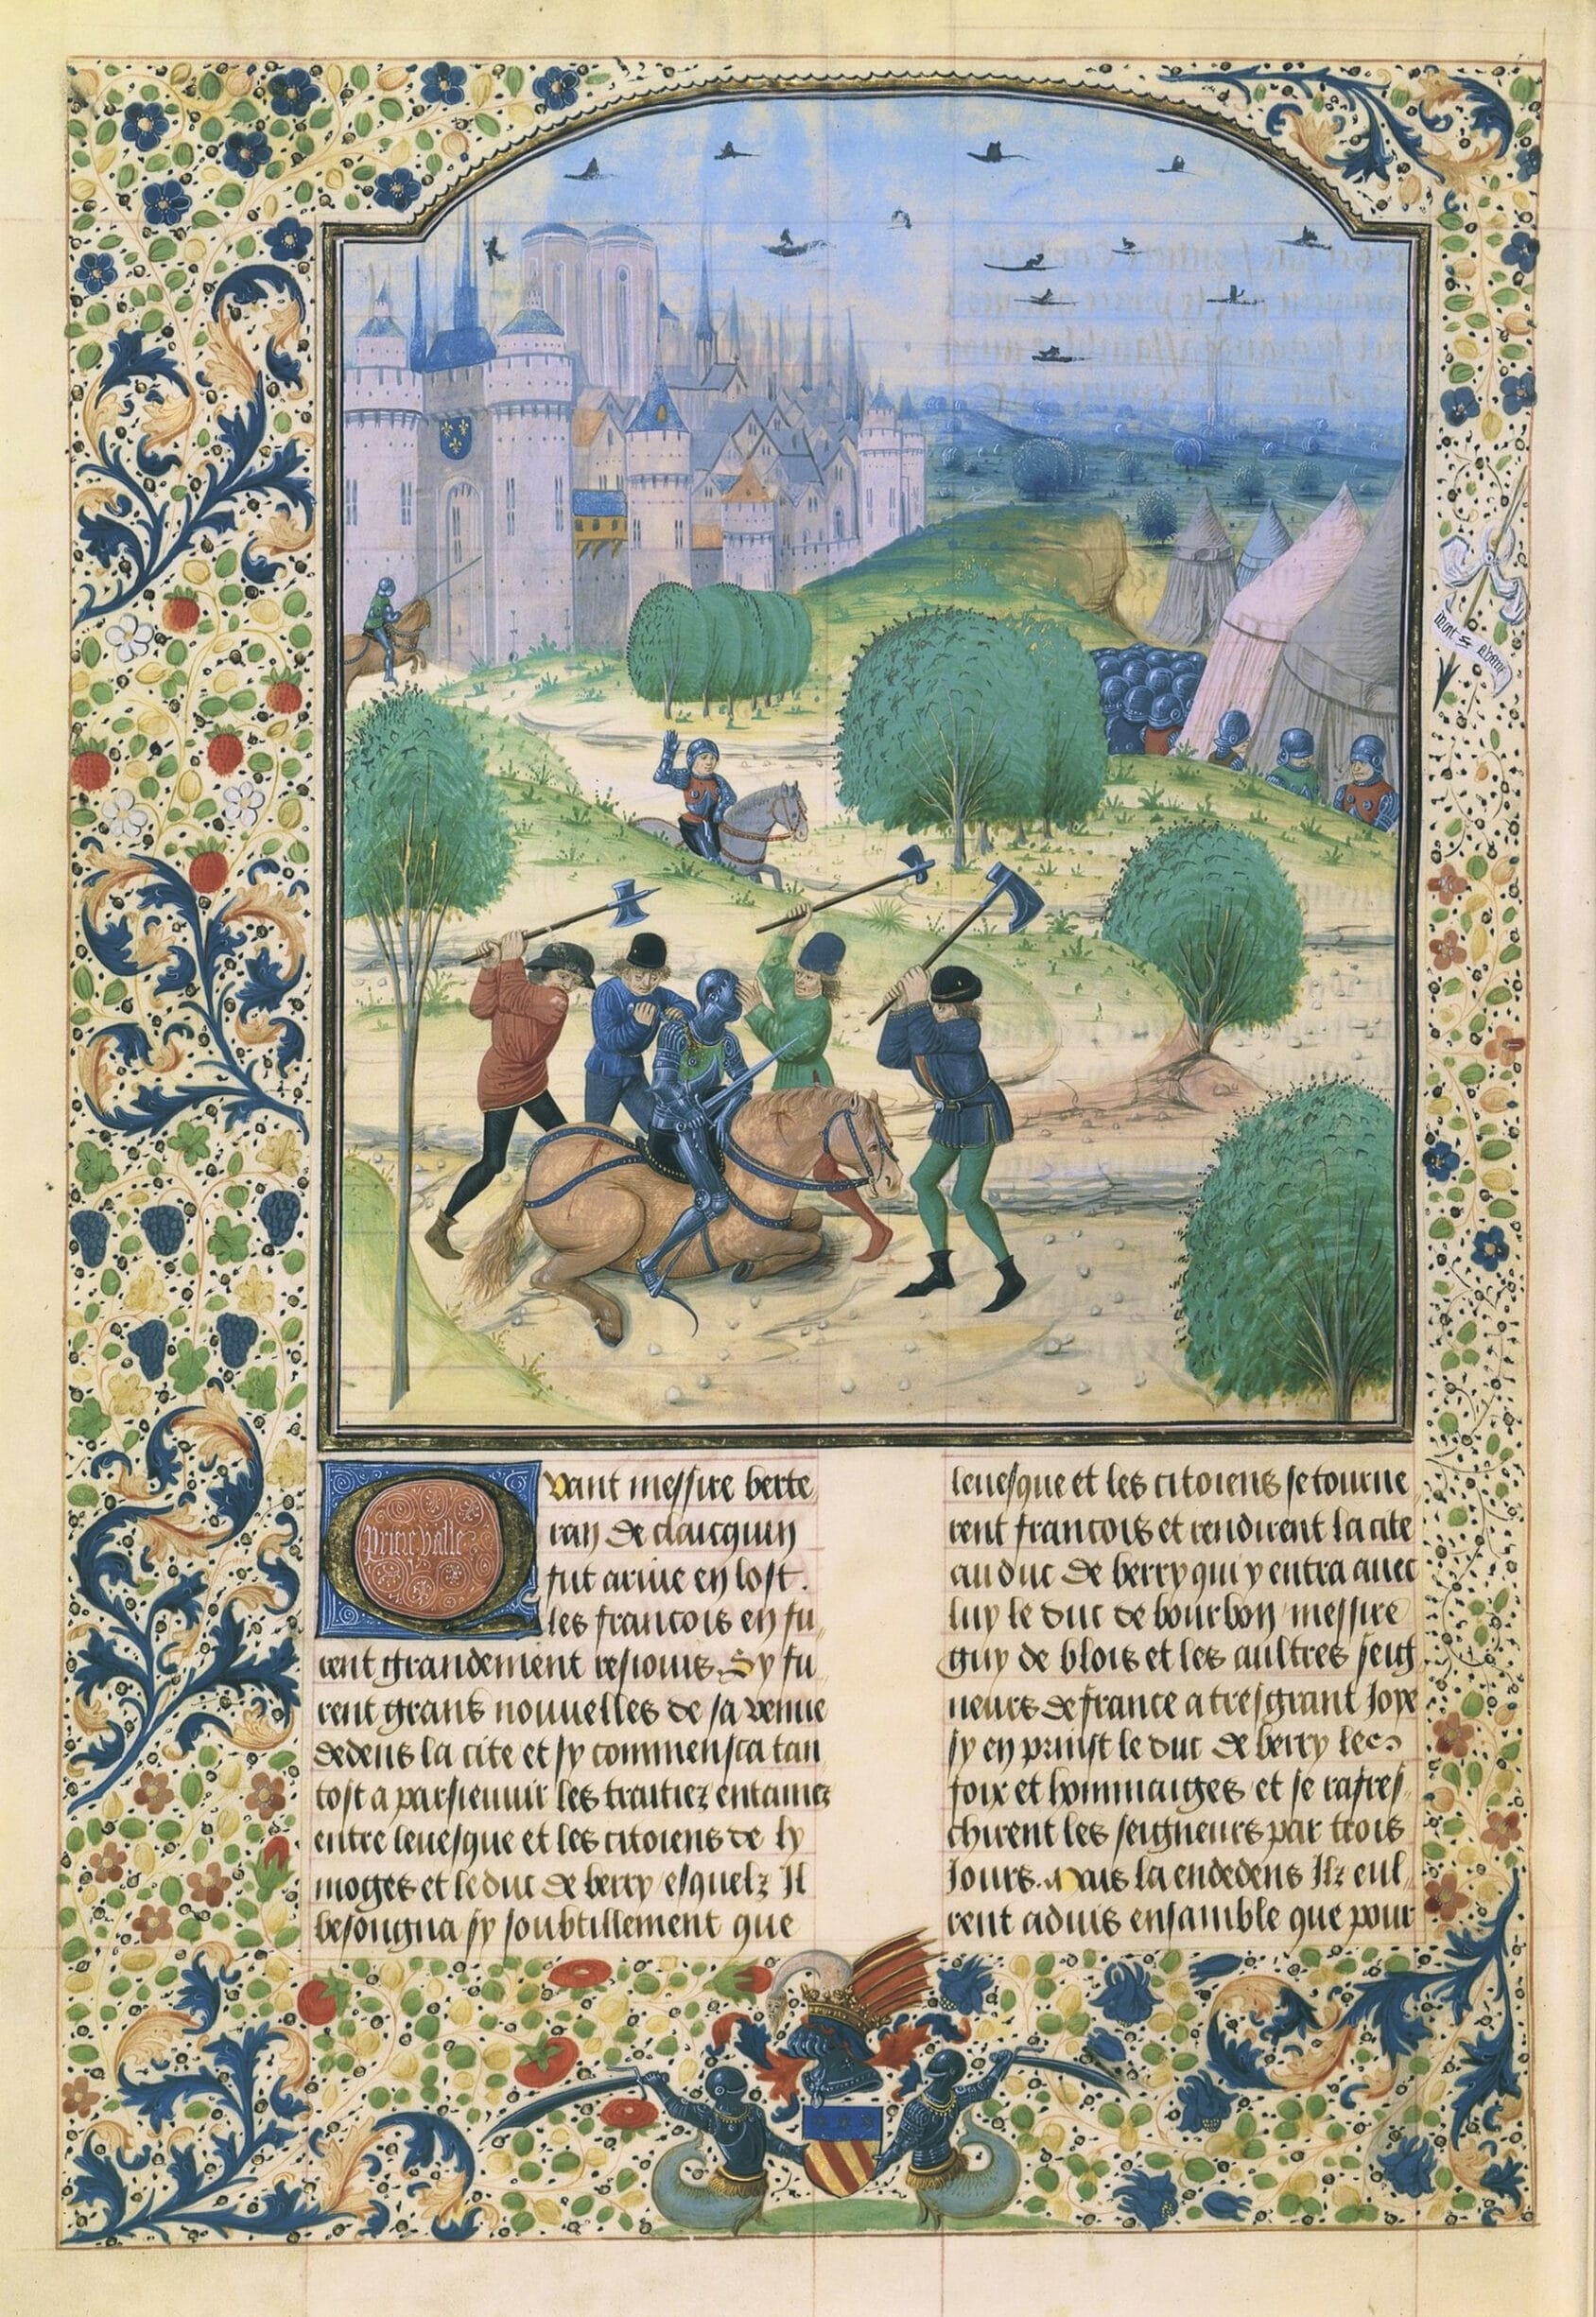 While trying to take the fortress of the Meaux market, where the family of the Dauphin Charles is entrenched, the Jacques and their Parisian allies are surprised by a charge of chivalry from Gaston Phébus and Jean de Grailli (June 9, 1358). Jean Froissart, Chroniques, Flandre, Bruges, 15th century. Illumination on parchment by Loyset Liédet (1420–after 1479 / after 1484), Flemish manuscript illuminator. Collection: National Library of France. Public Domain.